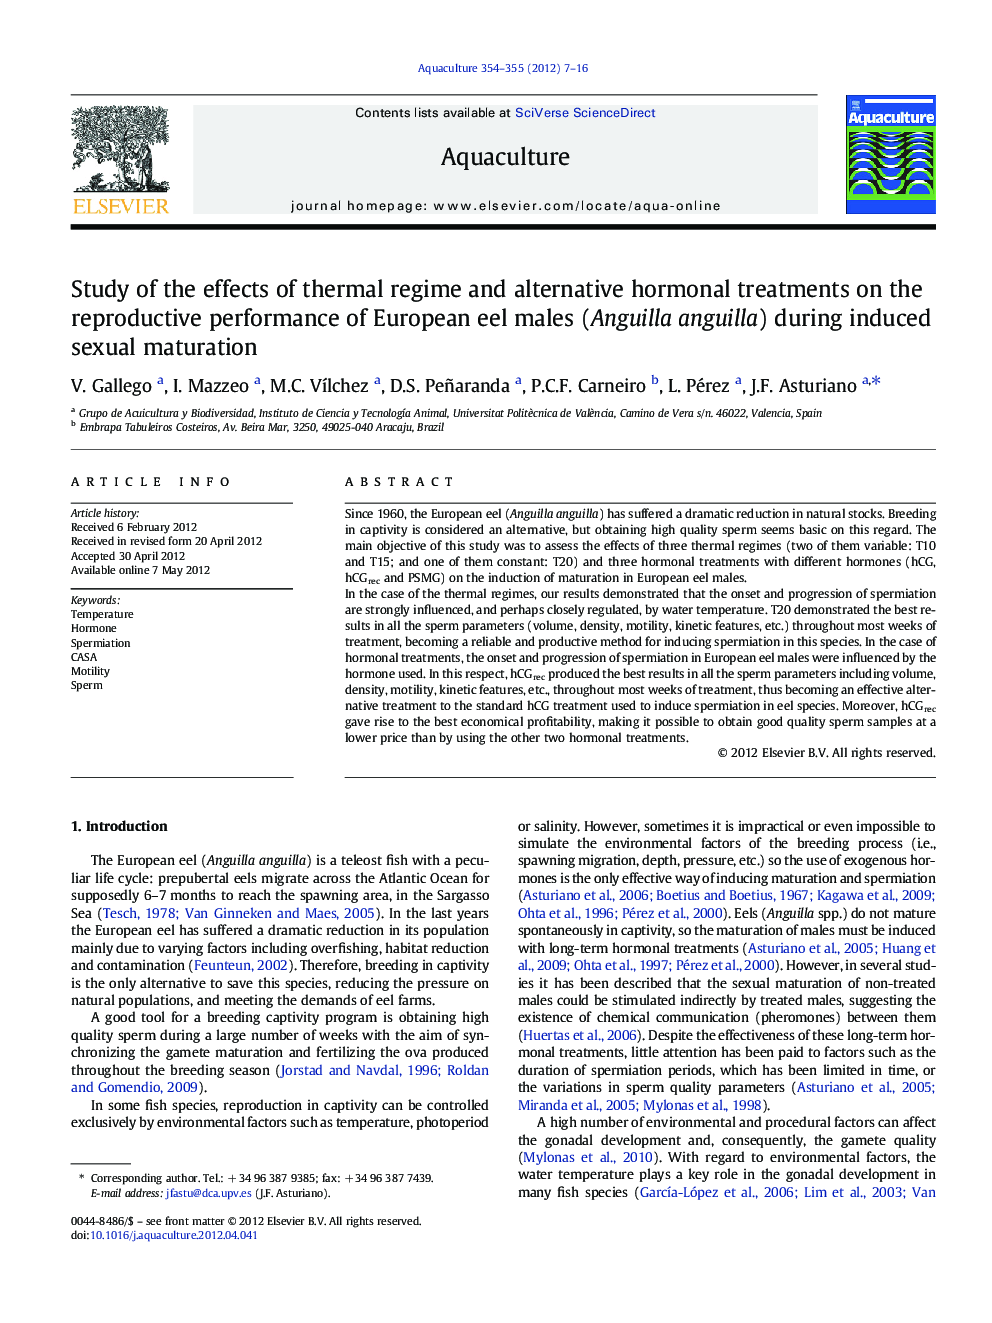 Study of the effects of thermal regime and alternative hormonal treatments on the reproductive performance of European eel males (Anguilla anguilla) during induced sexual maturation